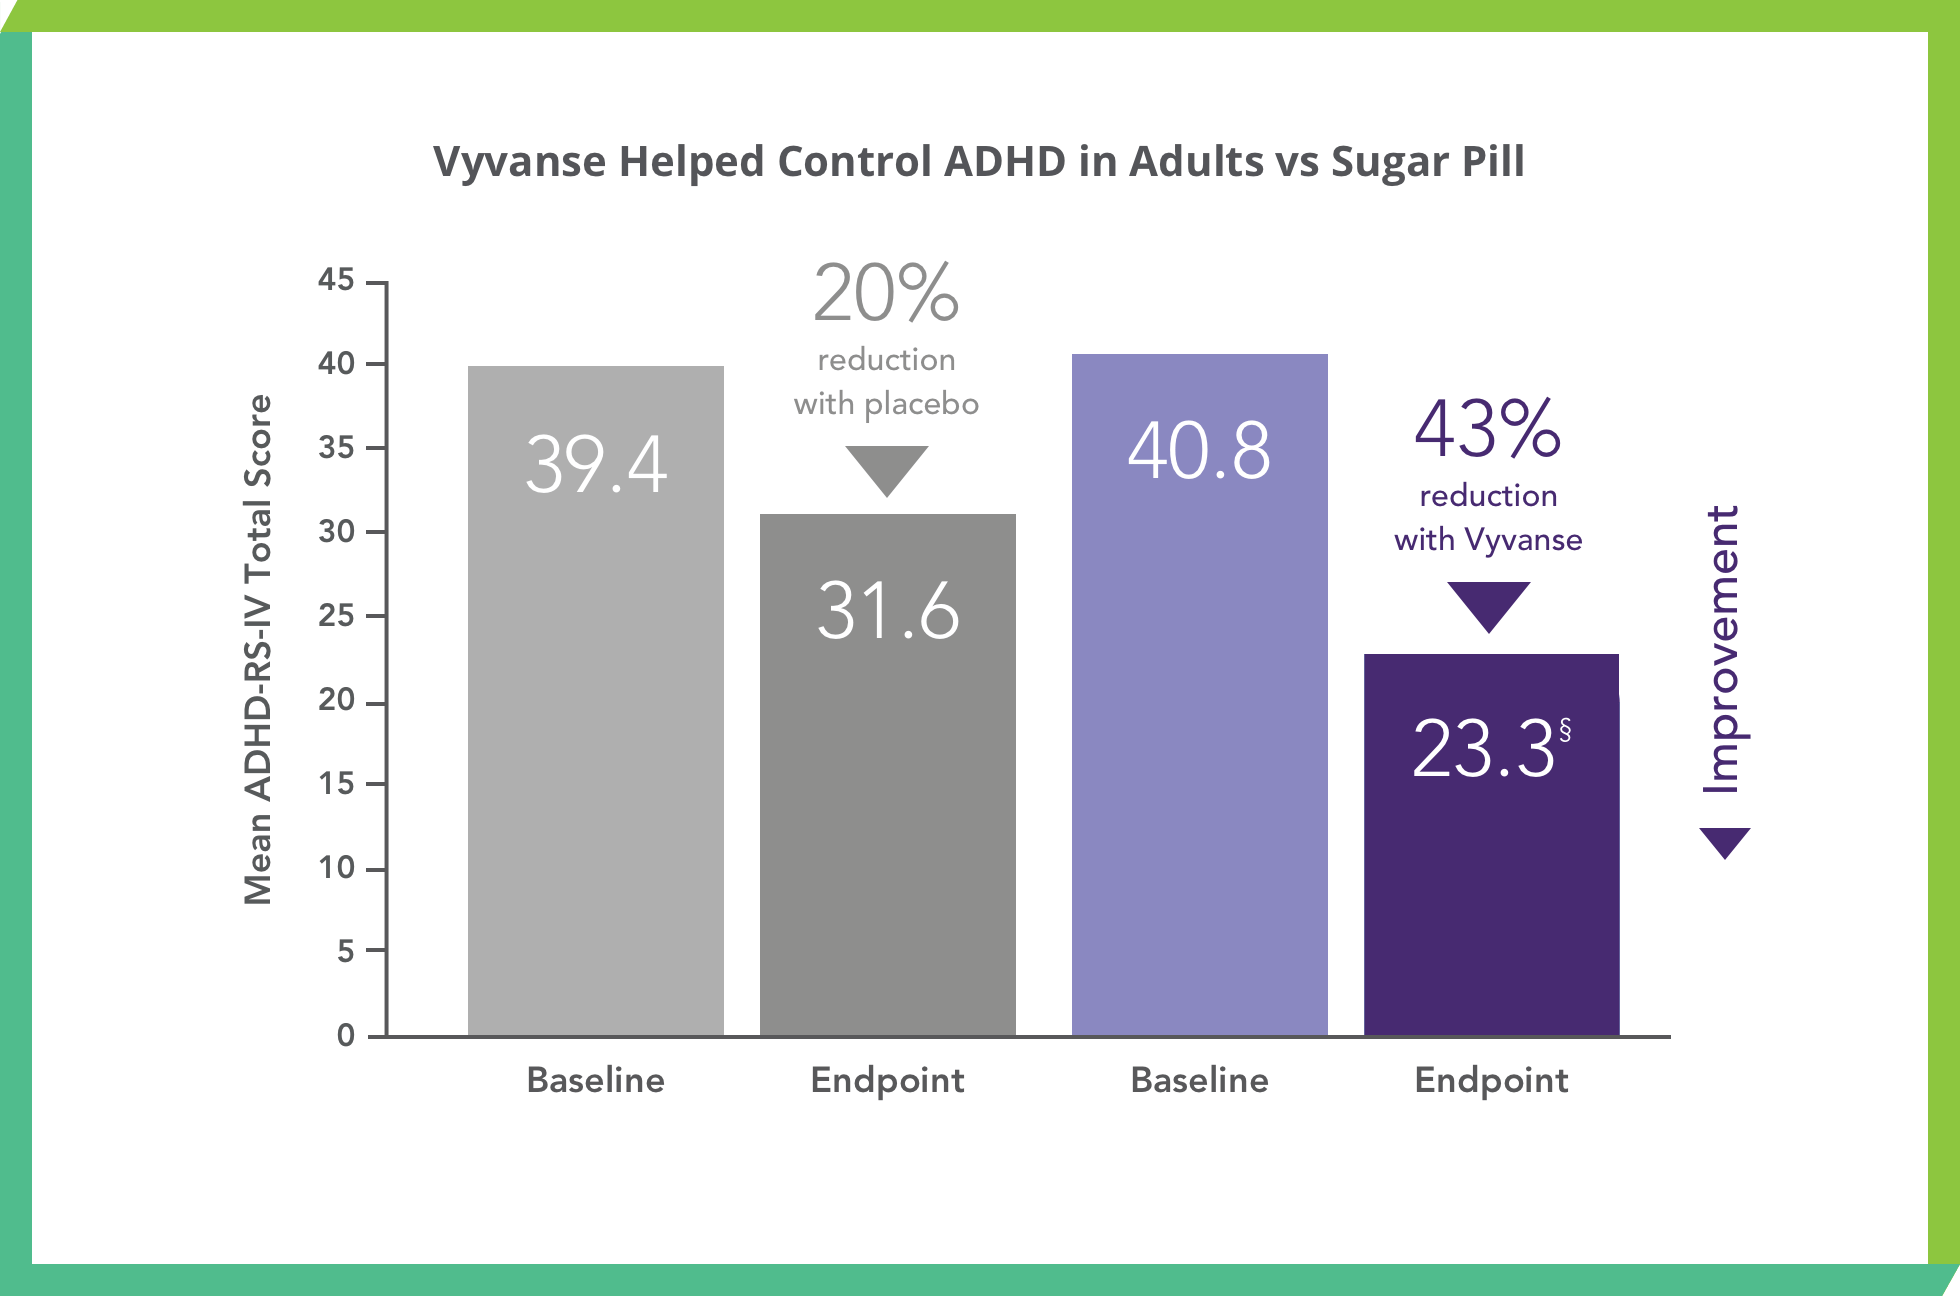  Graph depicting Vyvanse® Study 316 Efficacy Results: Vyvanse® helped control ADHD in Adults when compared to sugar pill.